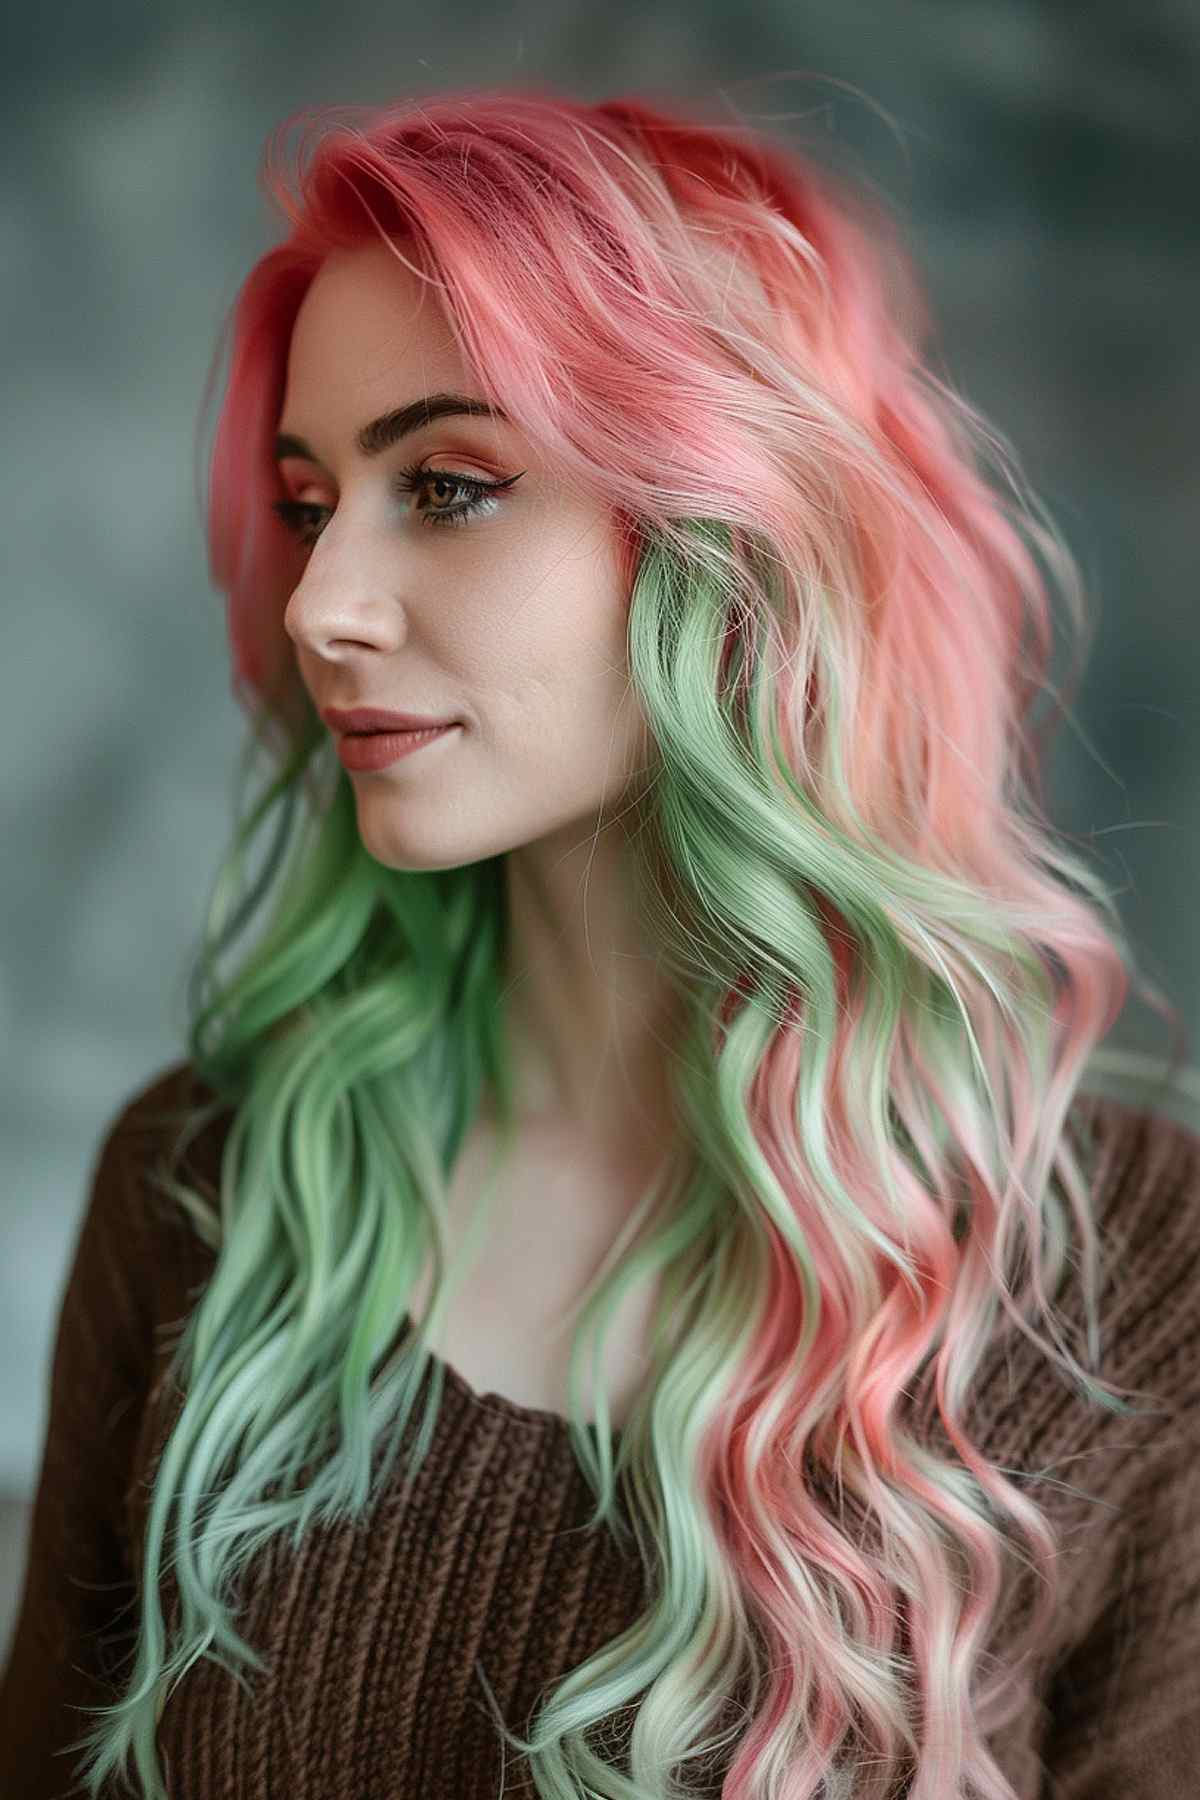 A woman with long, wavy hair colored in a gradient from deep watermelon pink at the roots to pastel green at the ends.